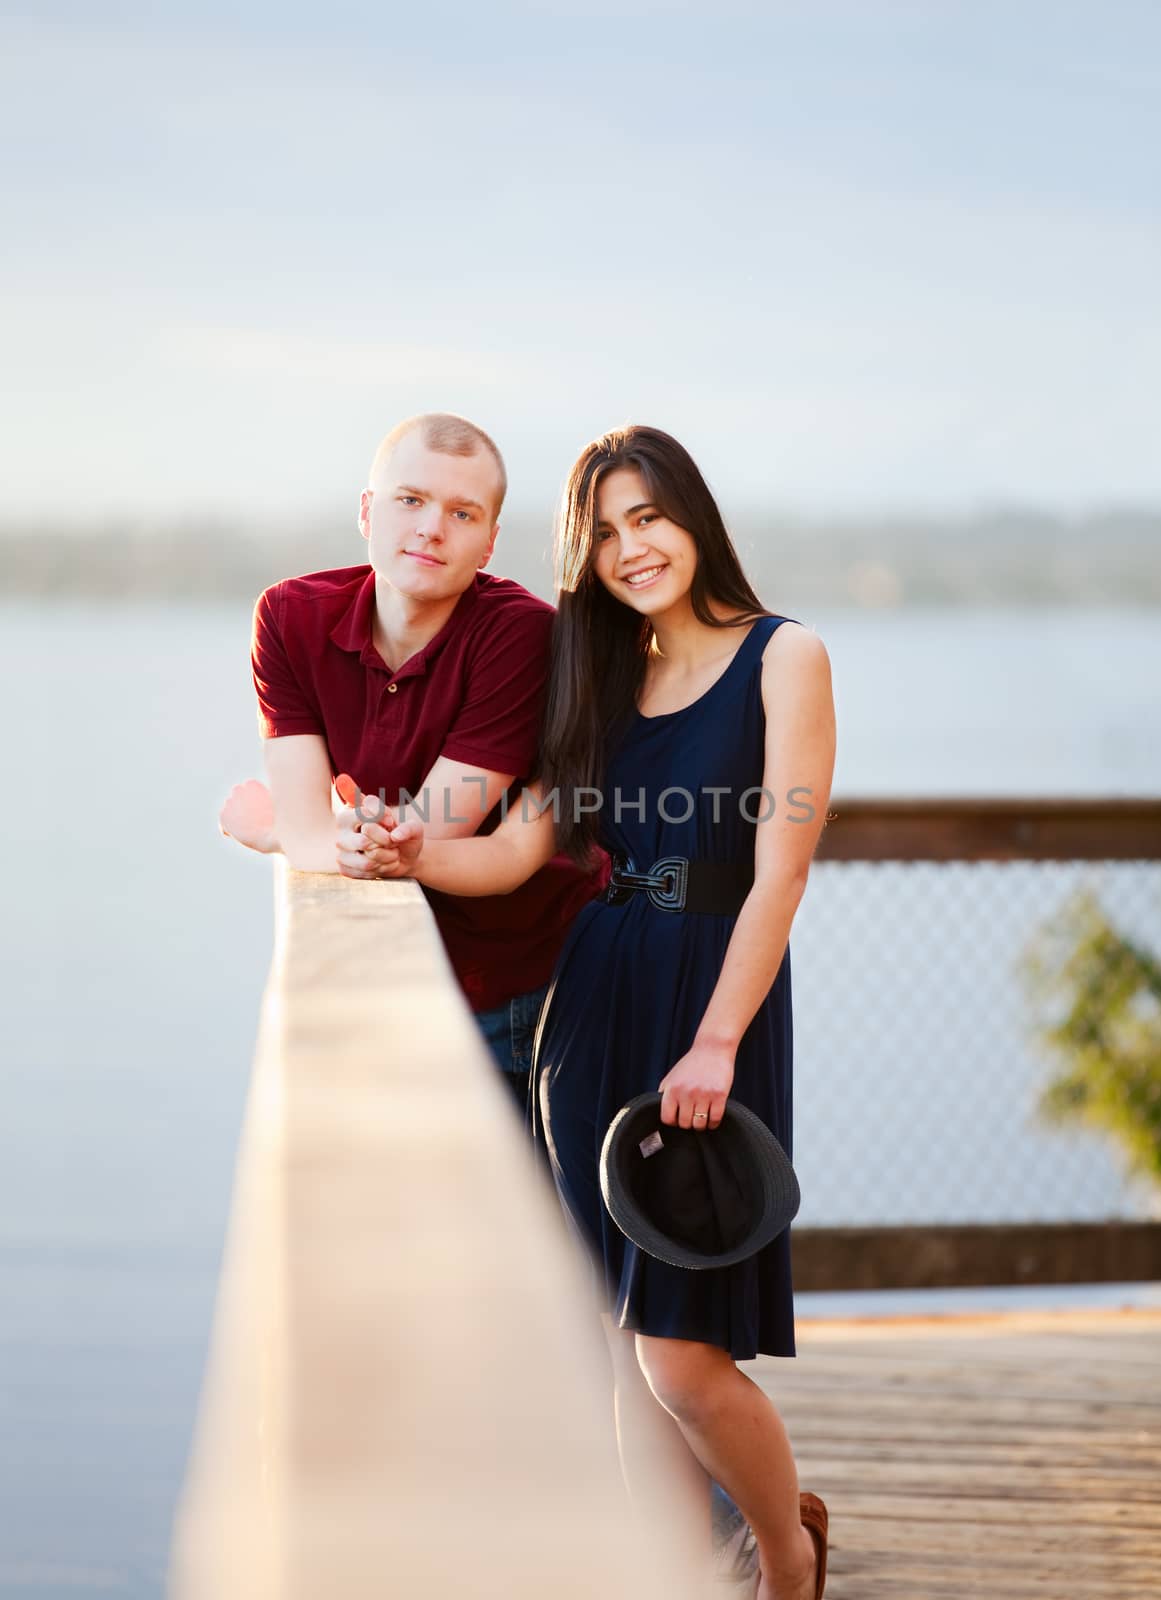 Young interracial couple standing together on wooden pier overlo by jarenwicklund